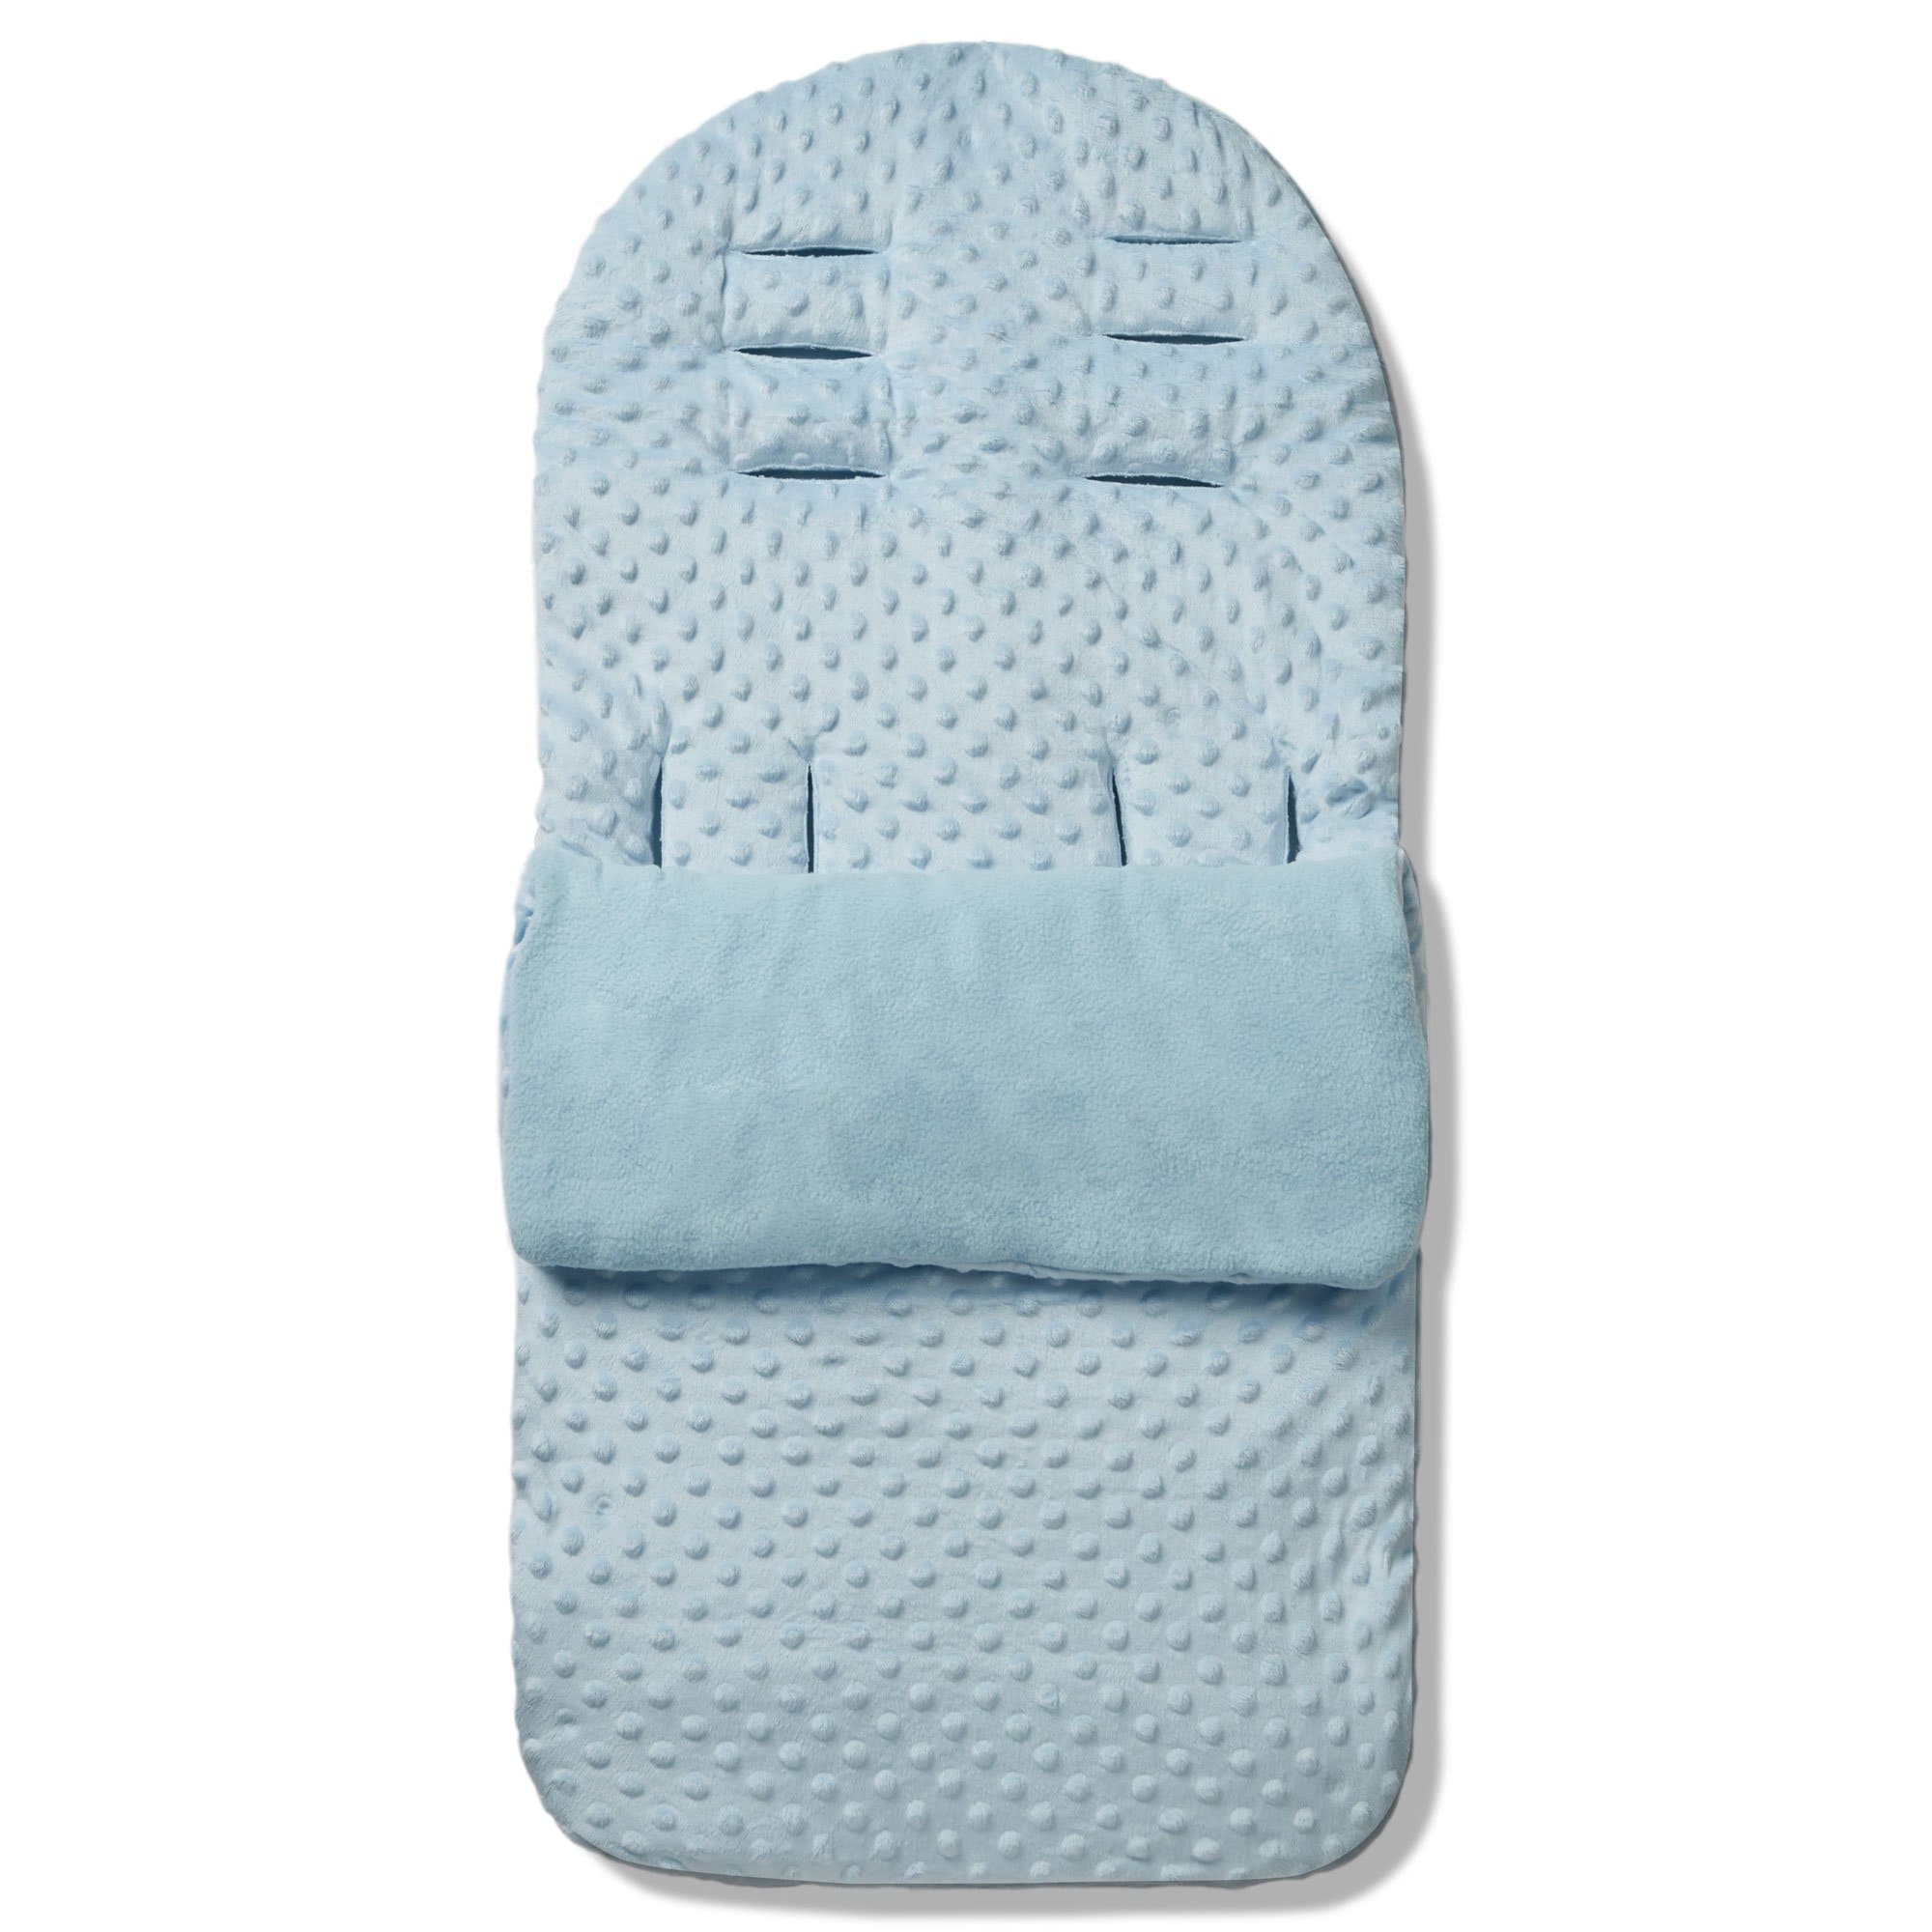 Dimple Footmuff / Cosy Toes Compatible with Inglesina - Blue / Fits All Models | For Your Little One